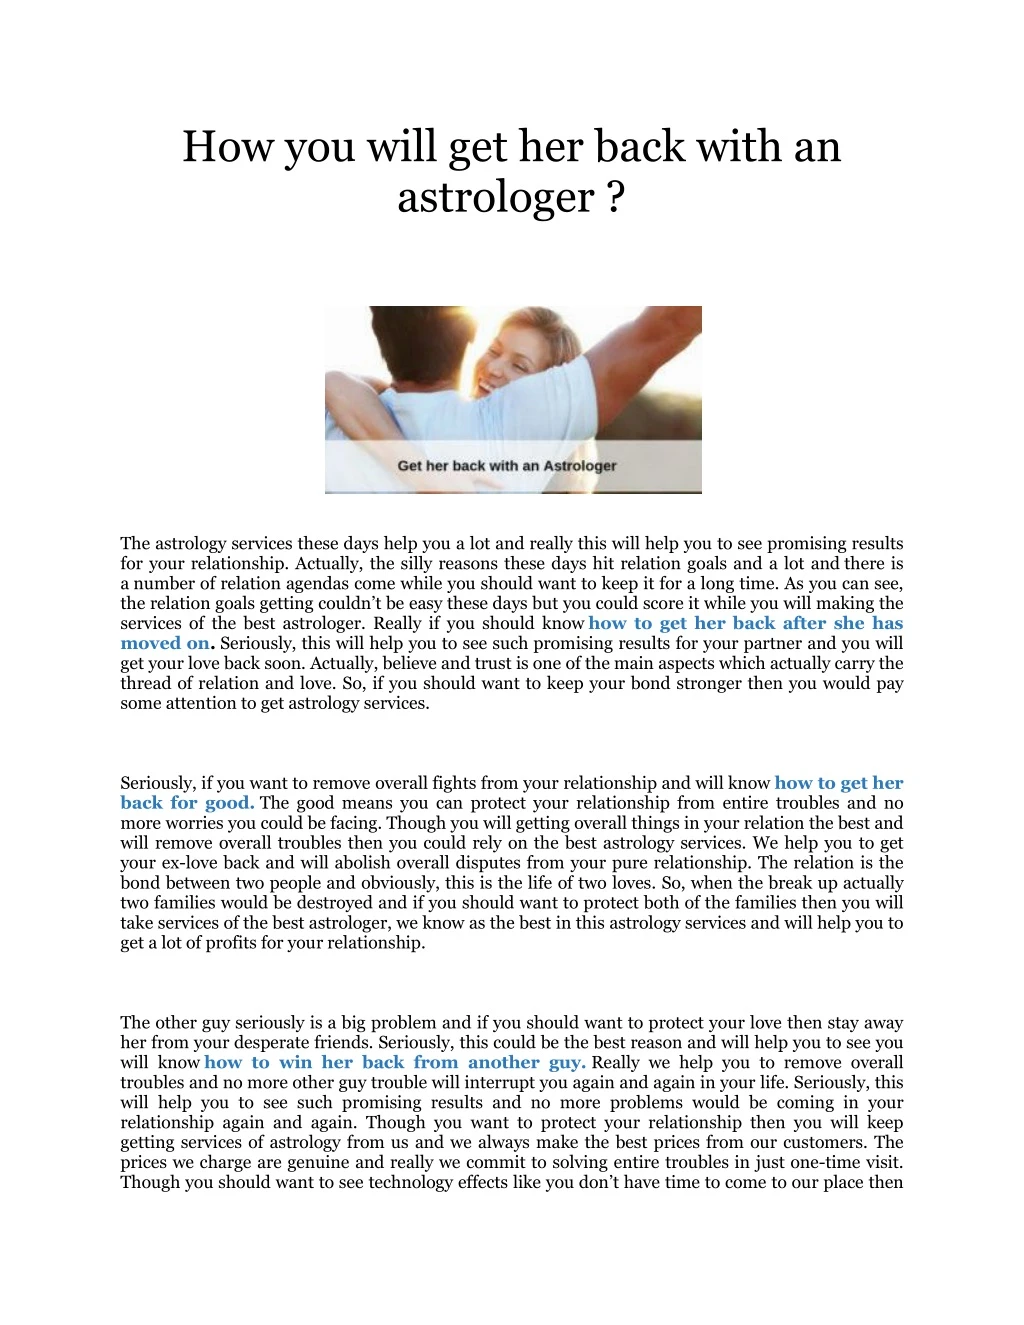 how you will get her back with an astrologer